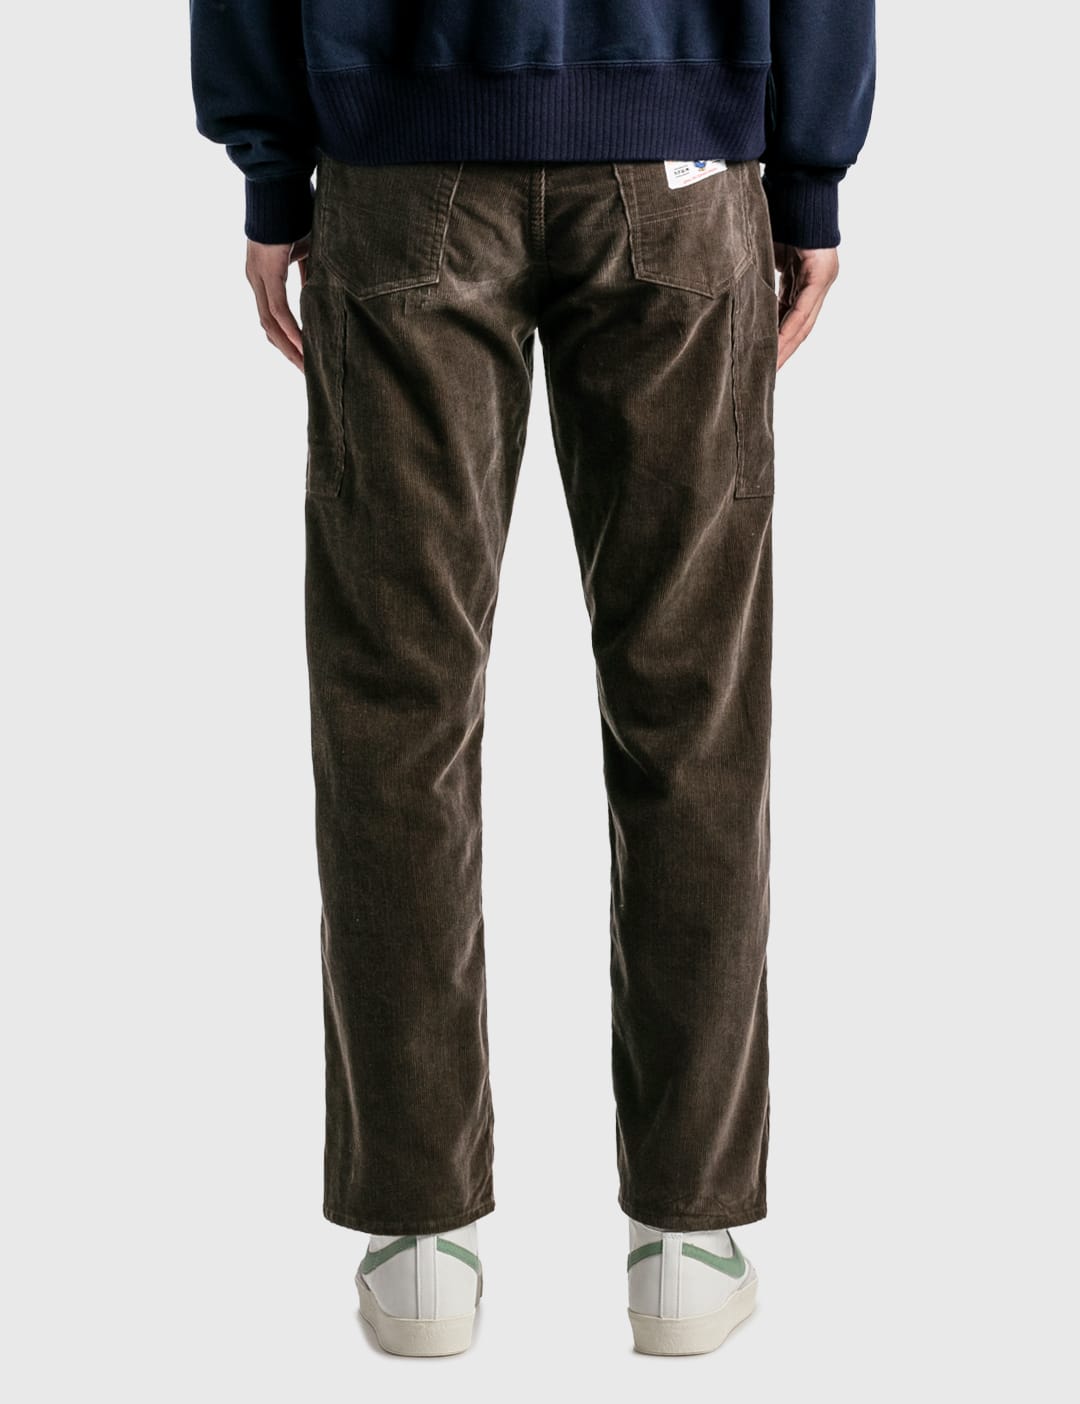 Human Made - Corduroy Pants | HBX - Globally Curated Fashion and